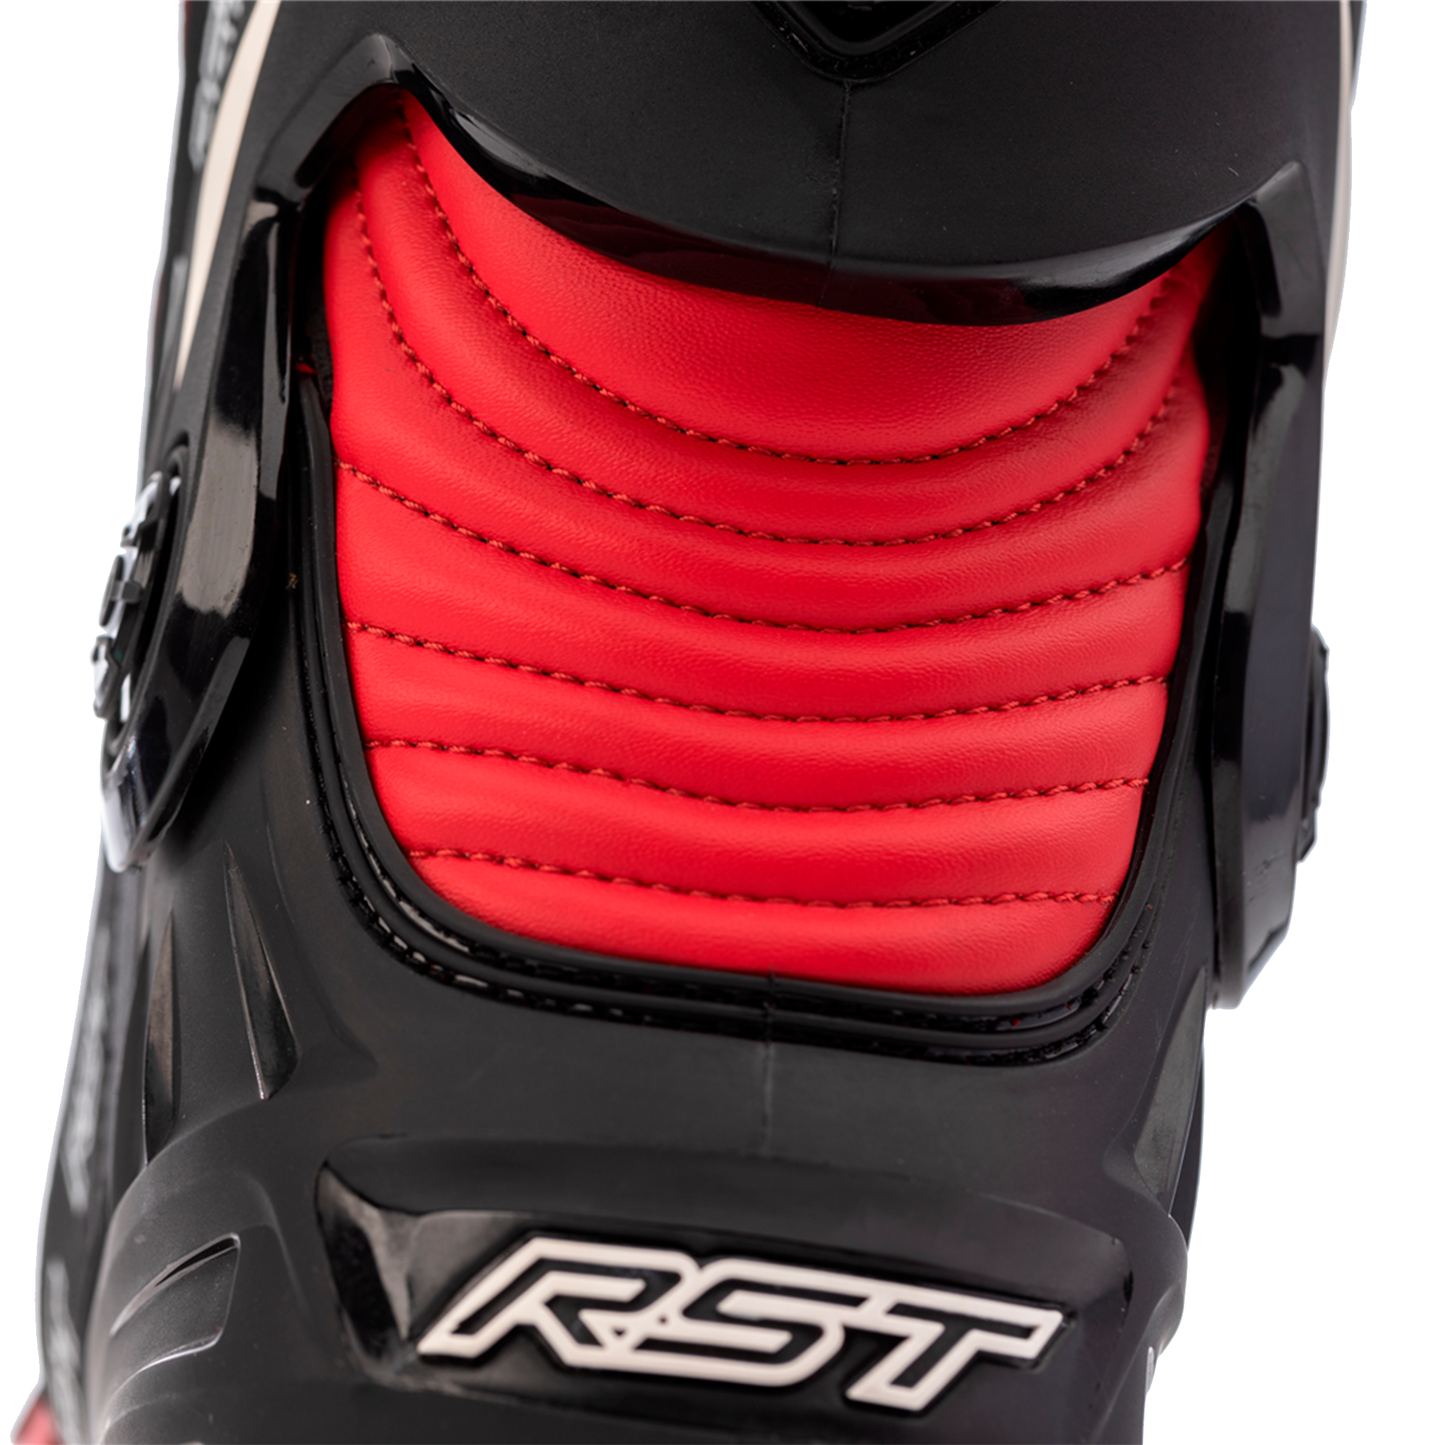 RST Tractech Evo III 3 CE Boots - Red/Black(2) (2101)